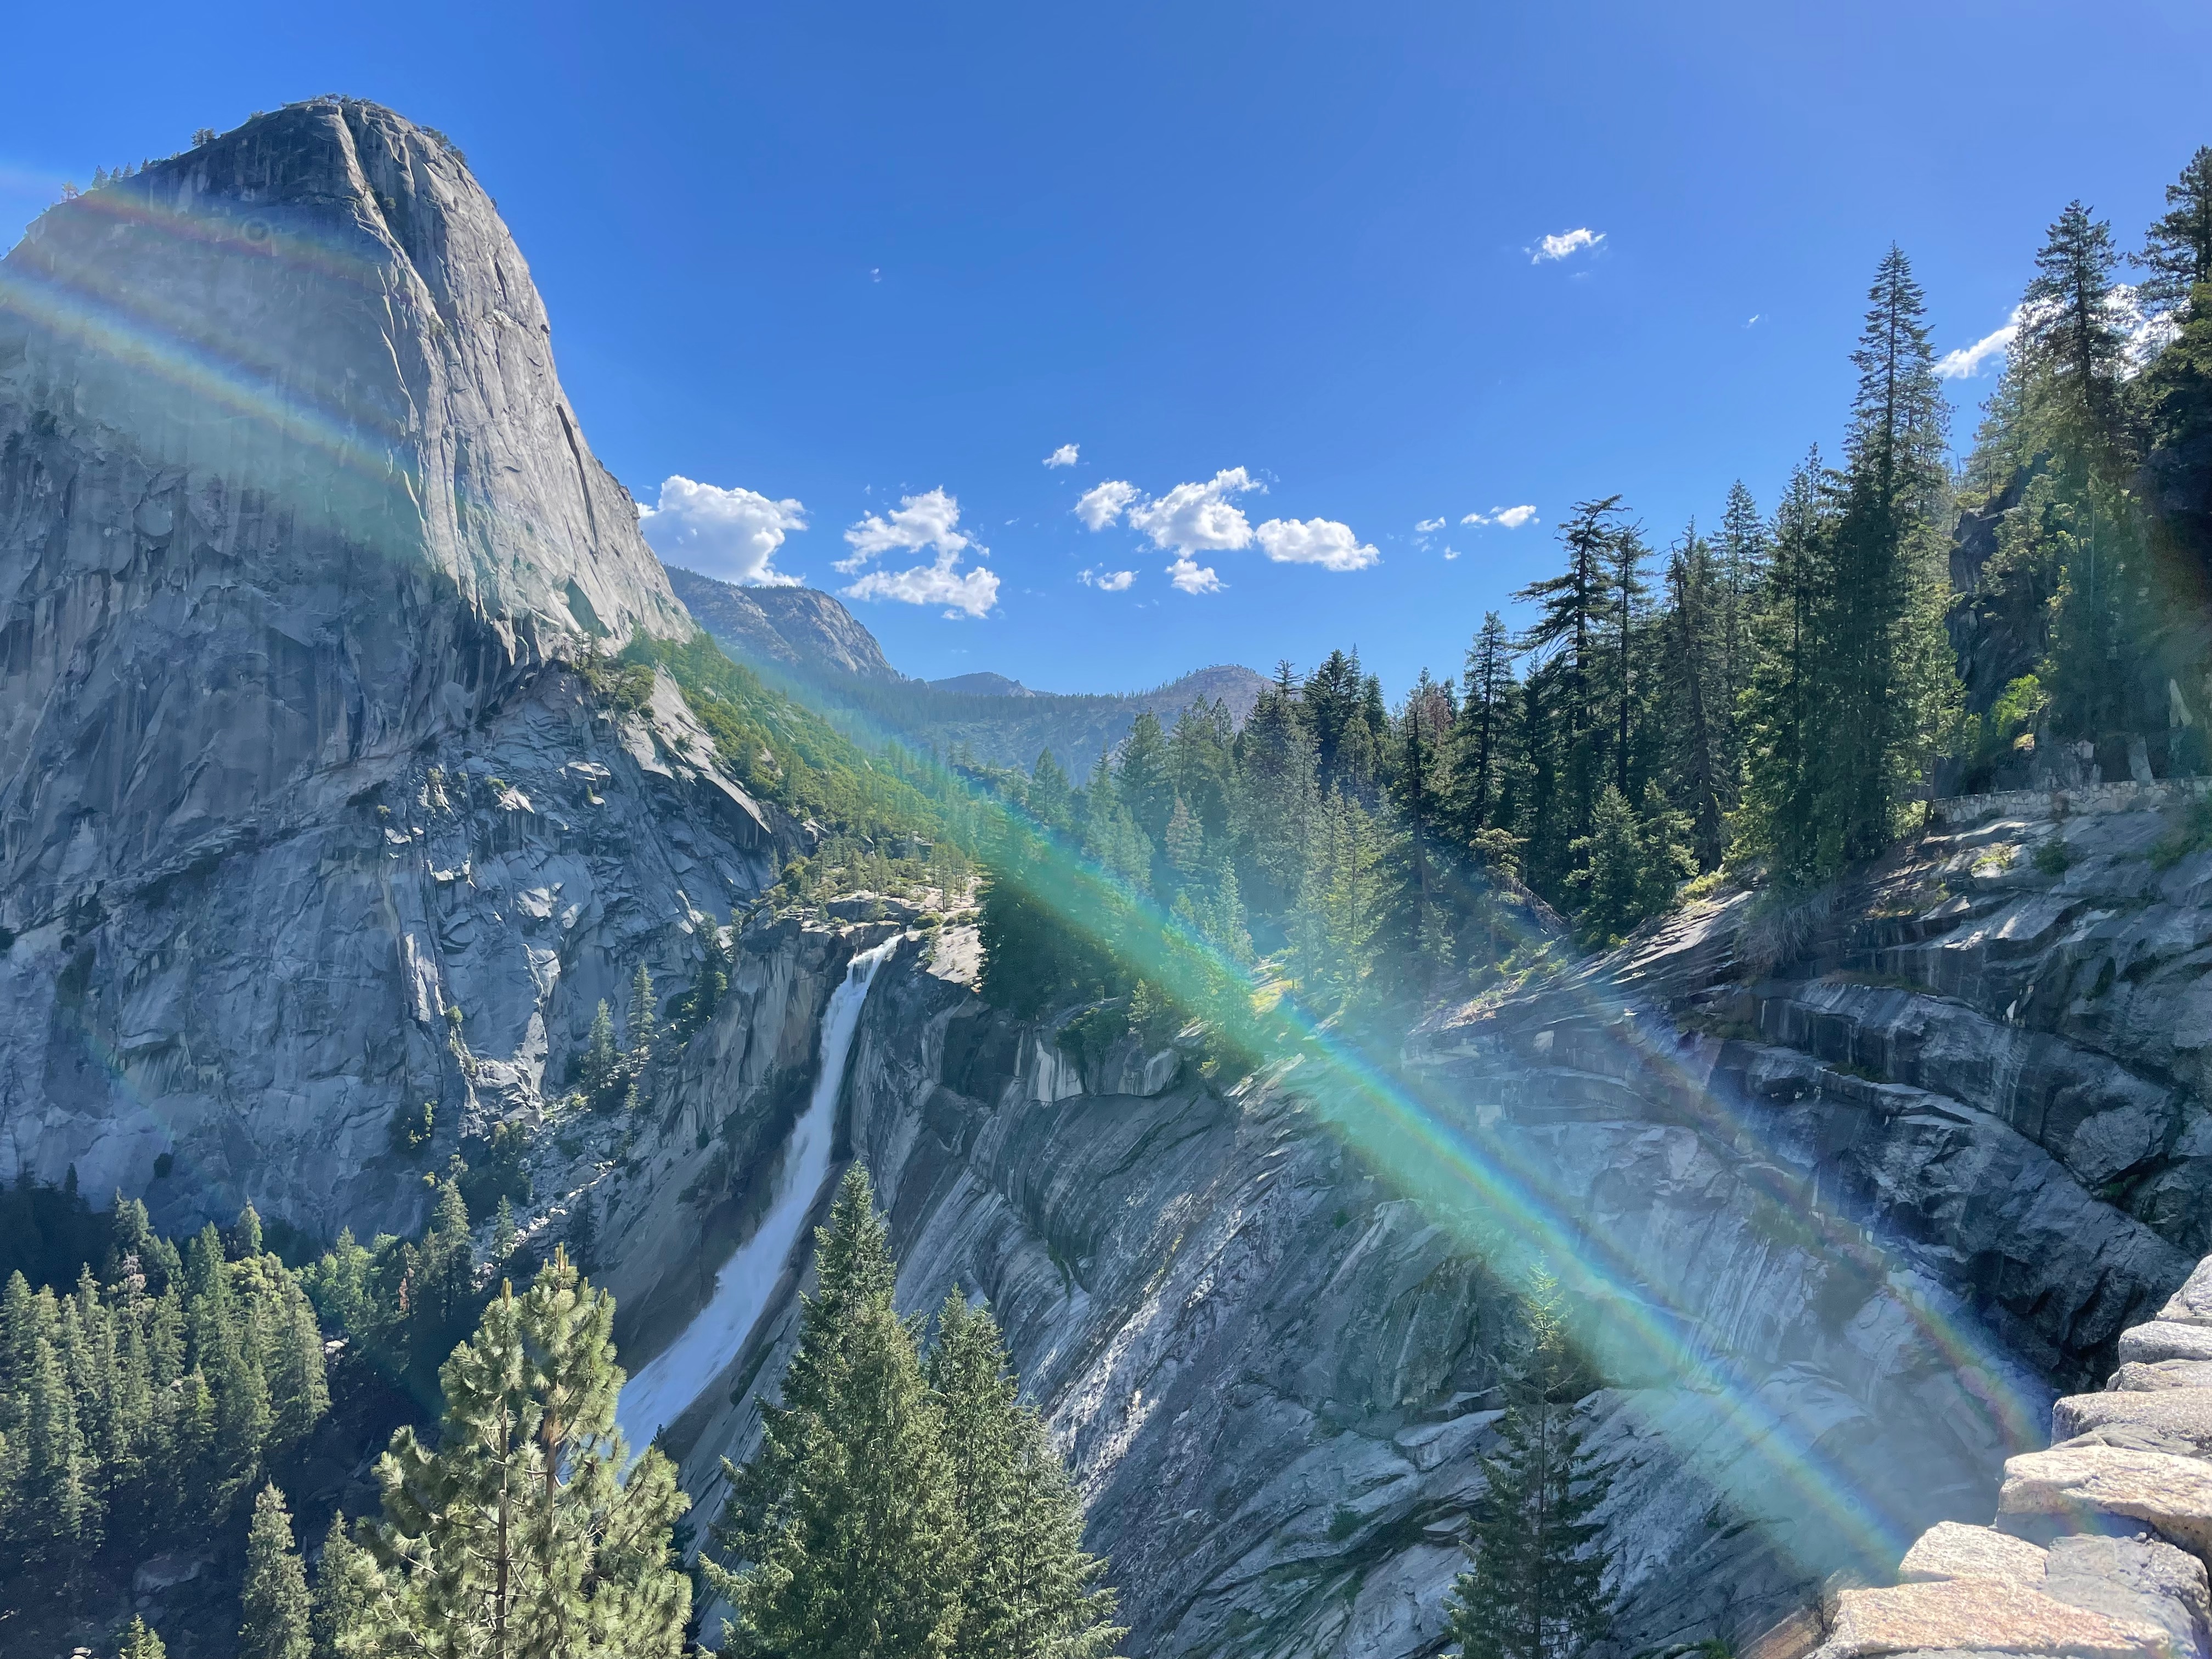 The view of Nevada Falls